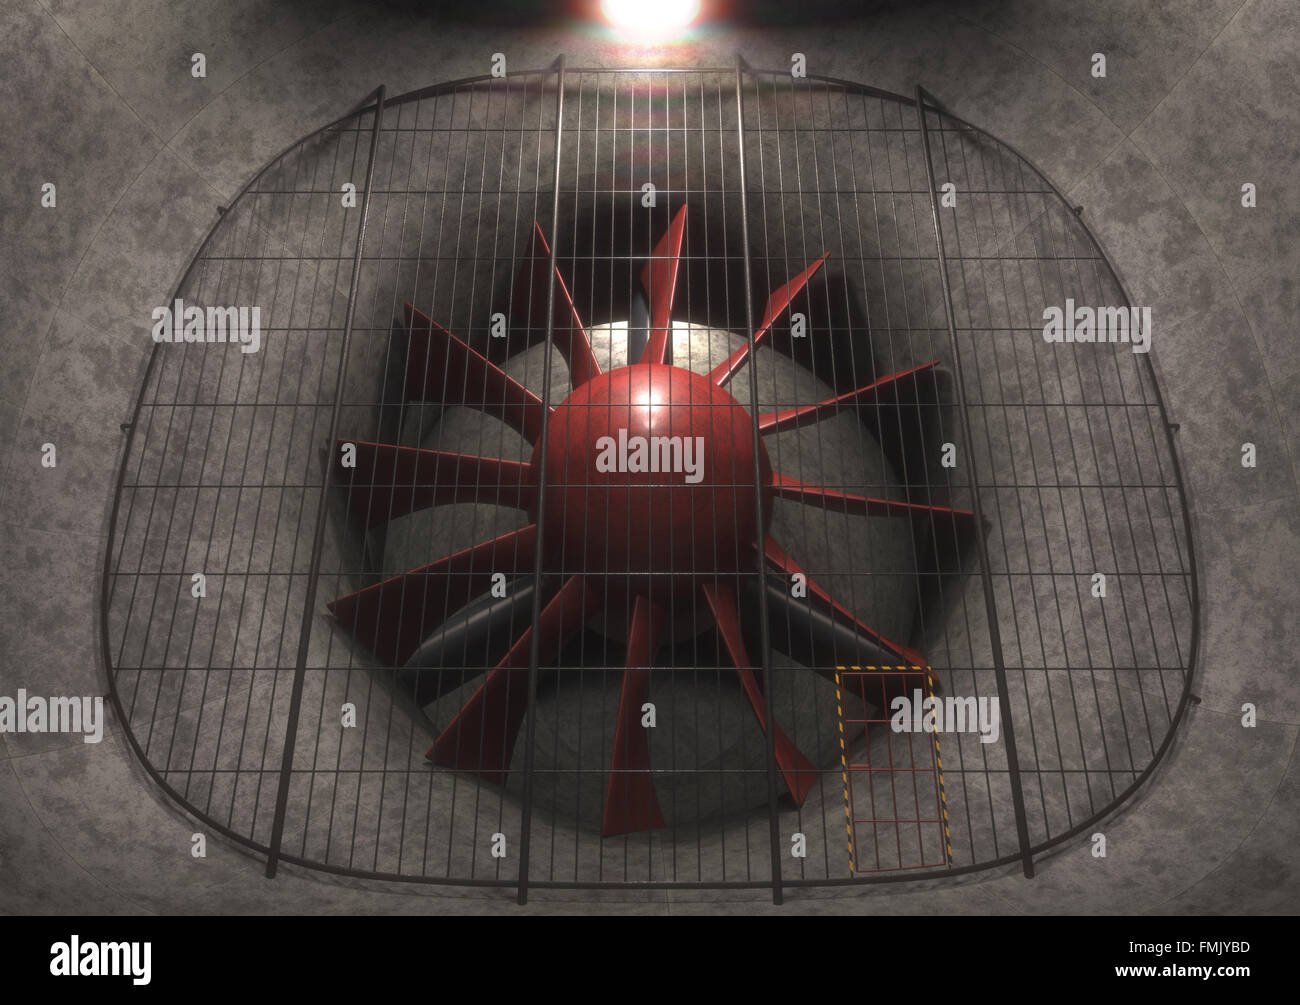 Giant wind tunnel with steel floor, tracks and safety lights. 3D concept image. Stock Photo